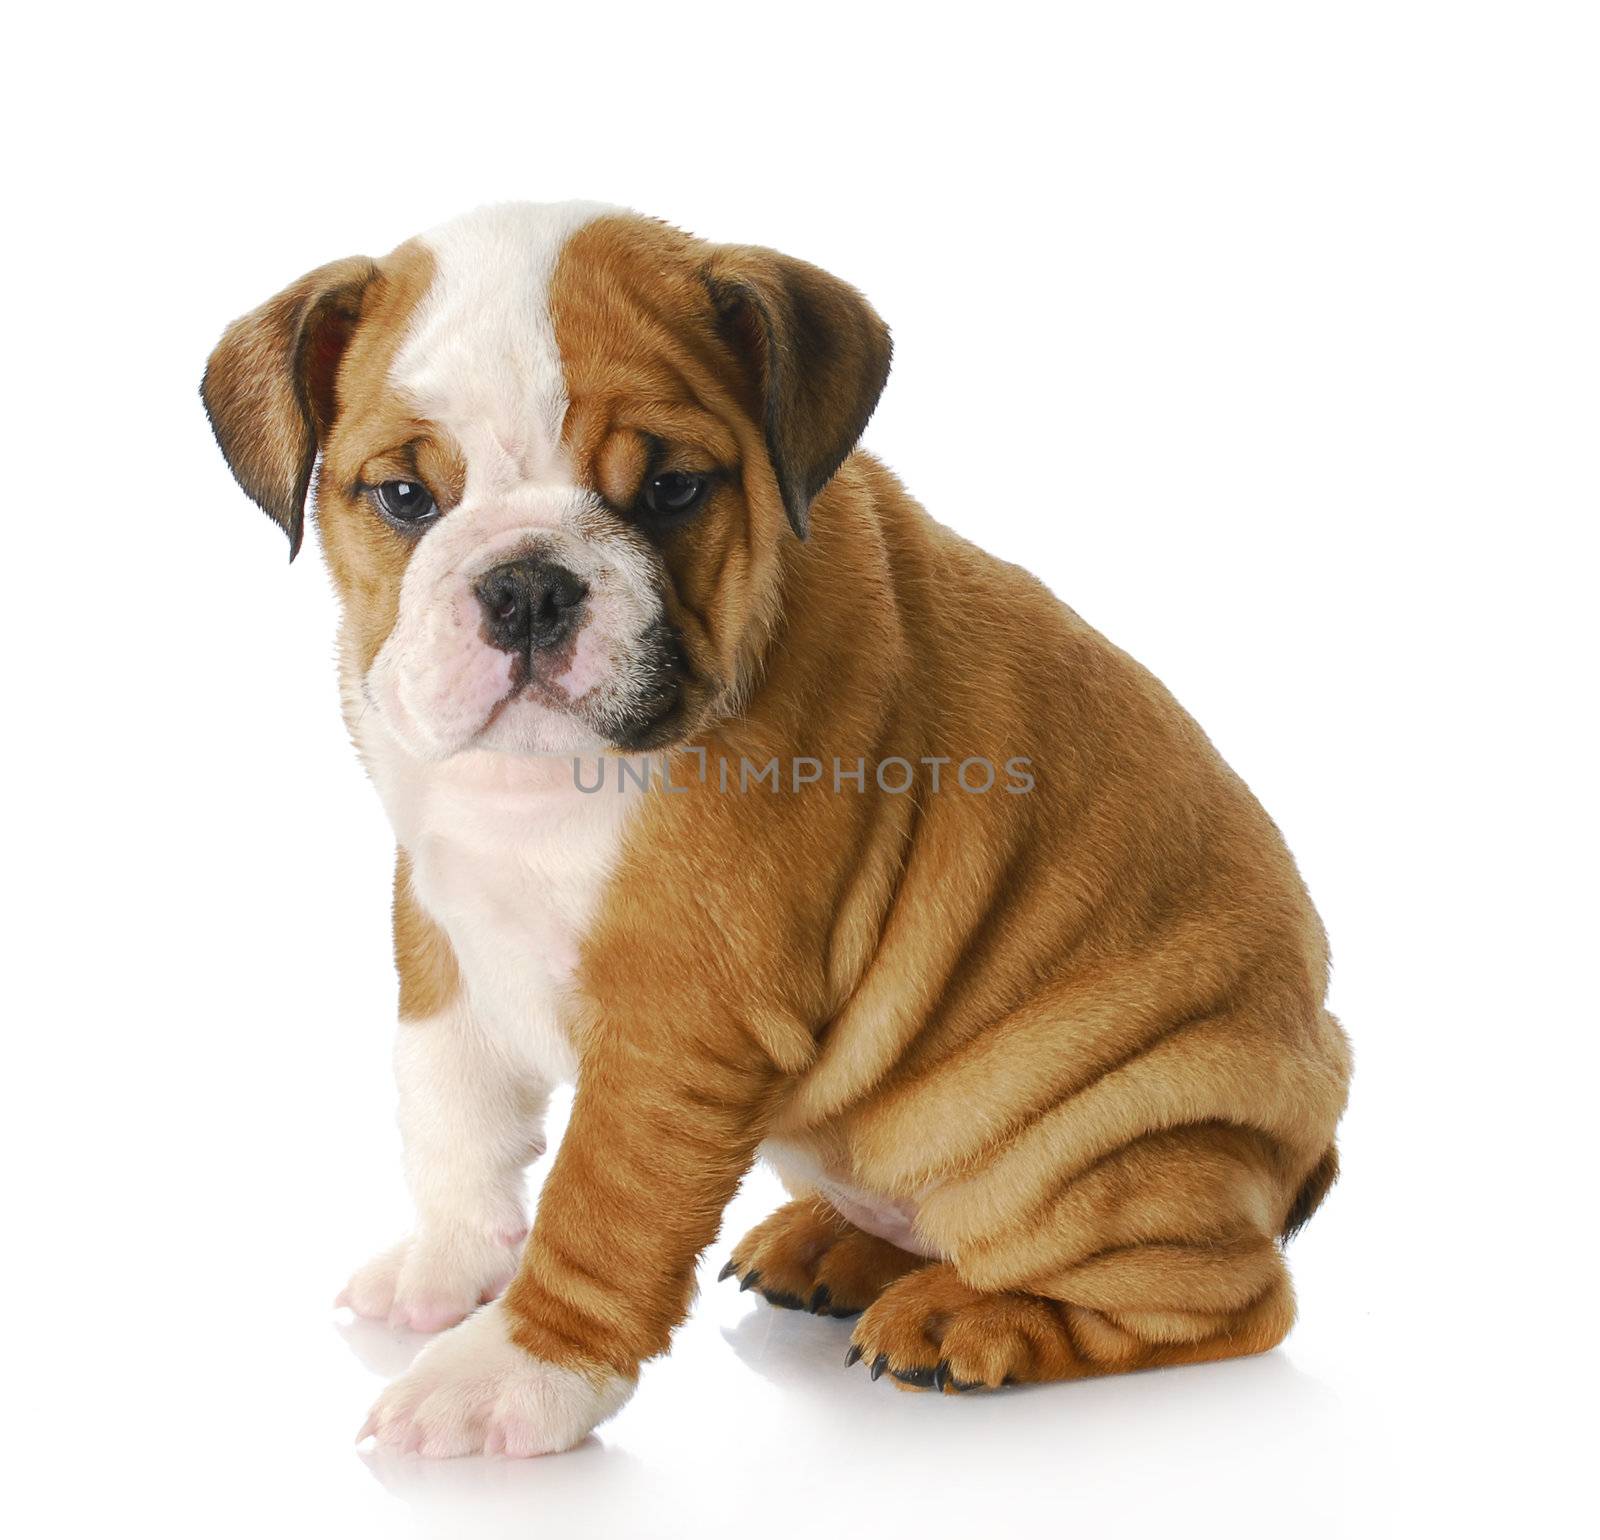 eight week old english bulldog puppy sitting with reflection on white background